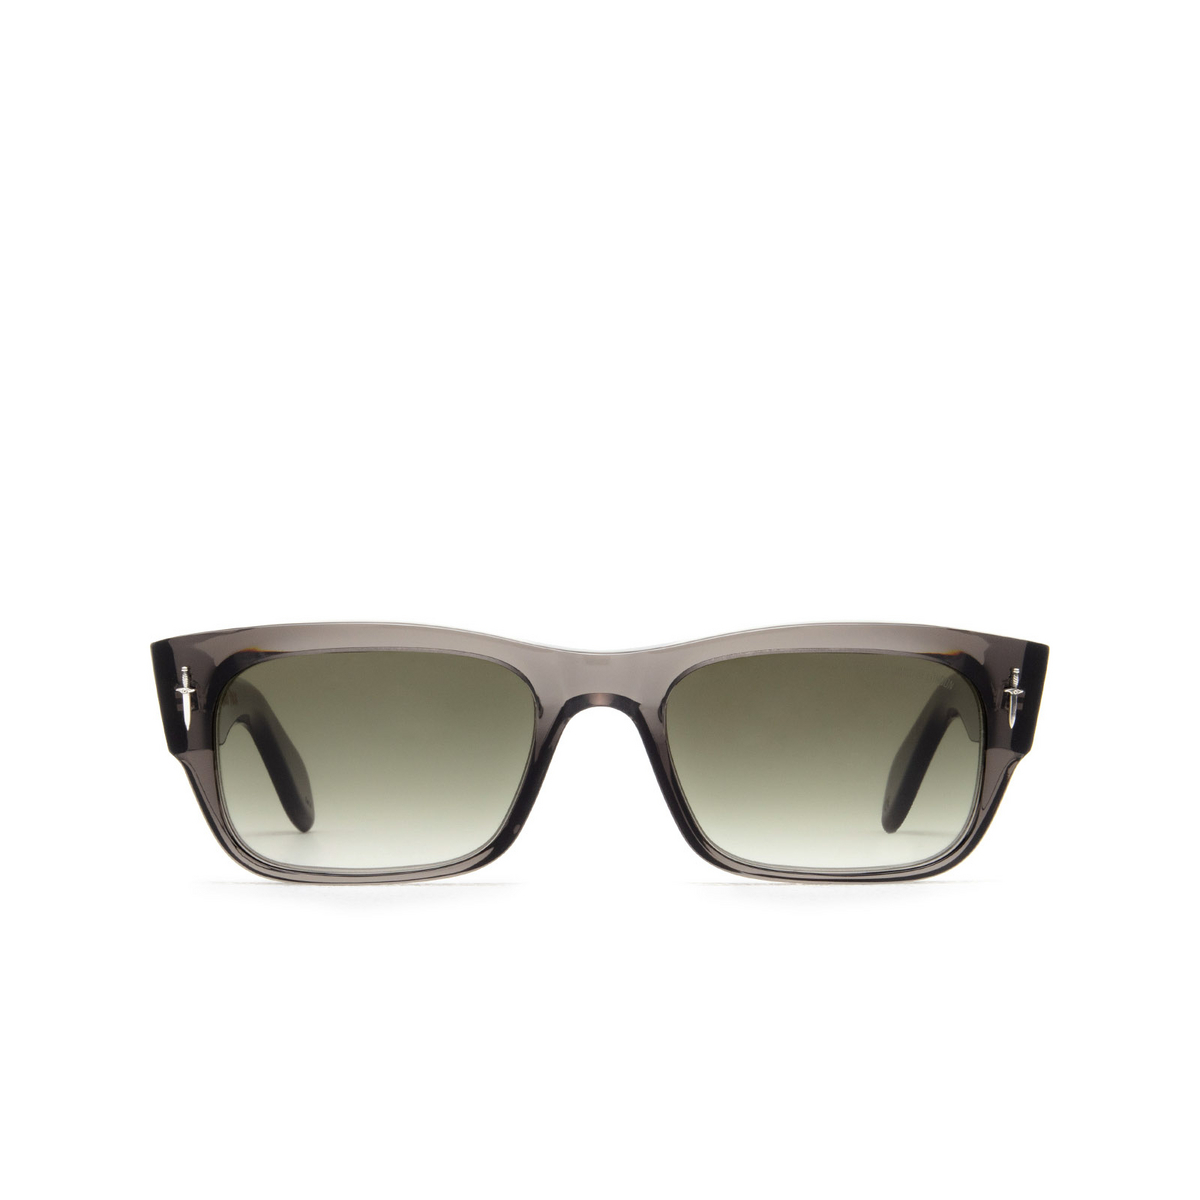 Cutler and Gross 002 Sunglasses 03 Pewter Grey - front view